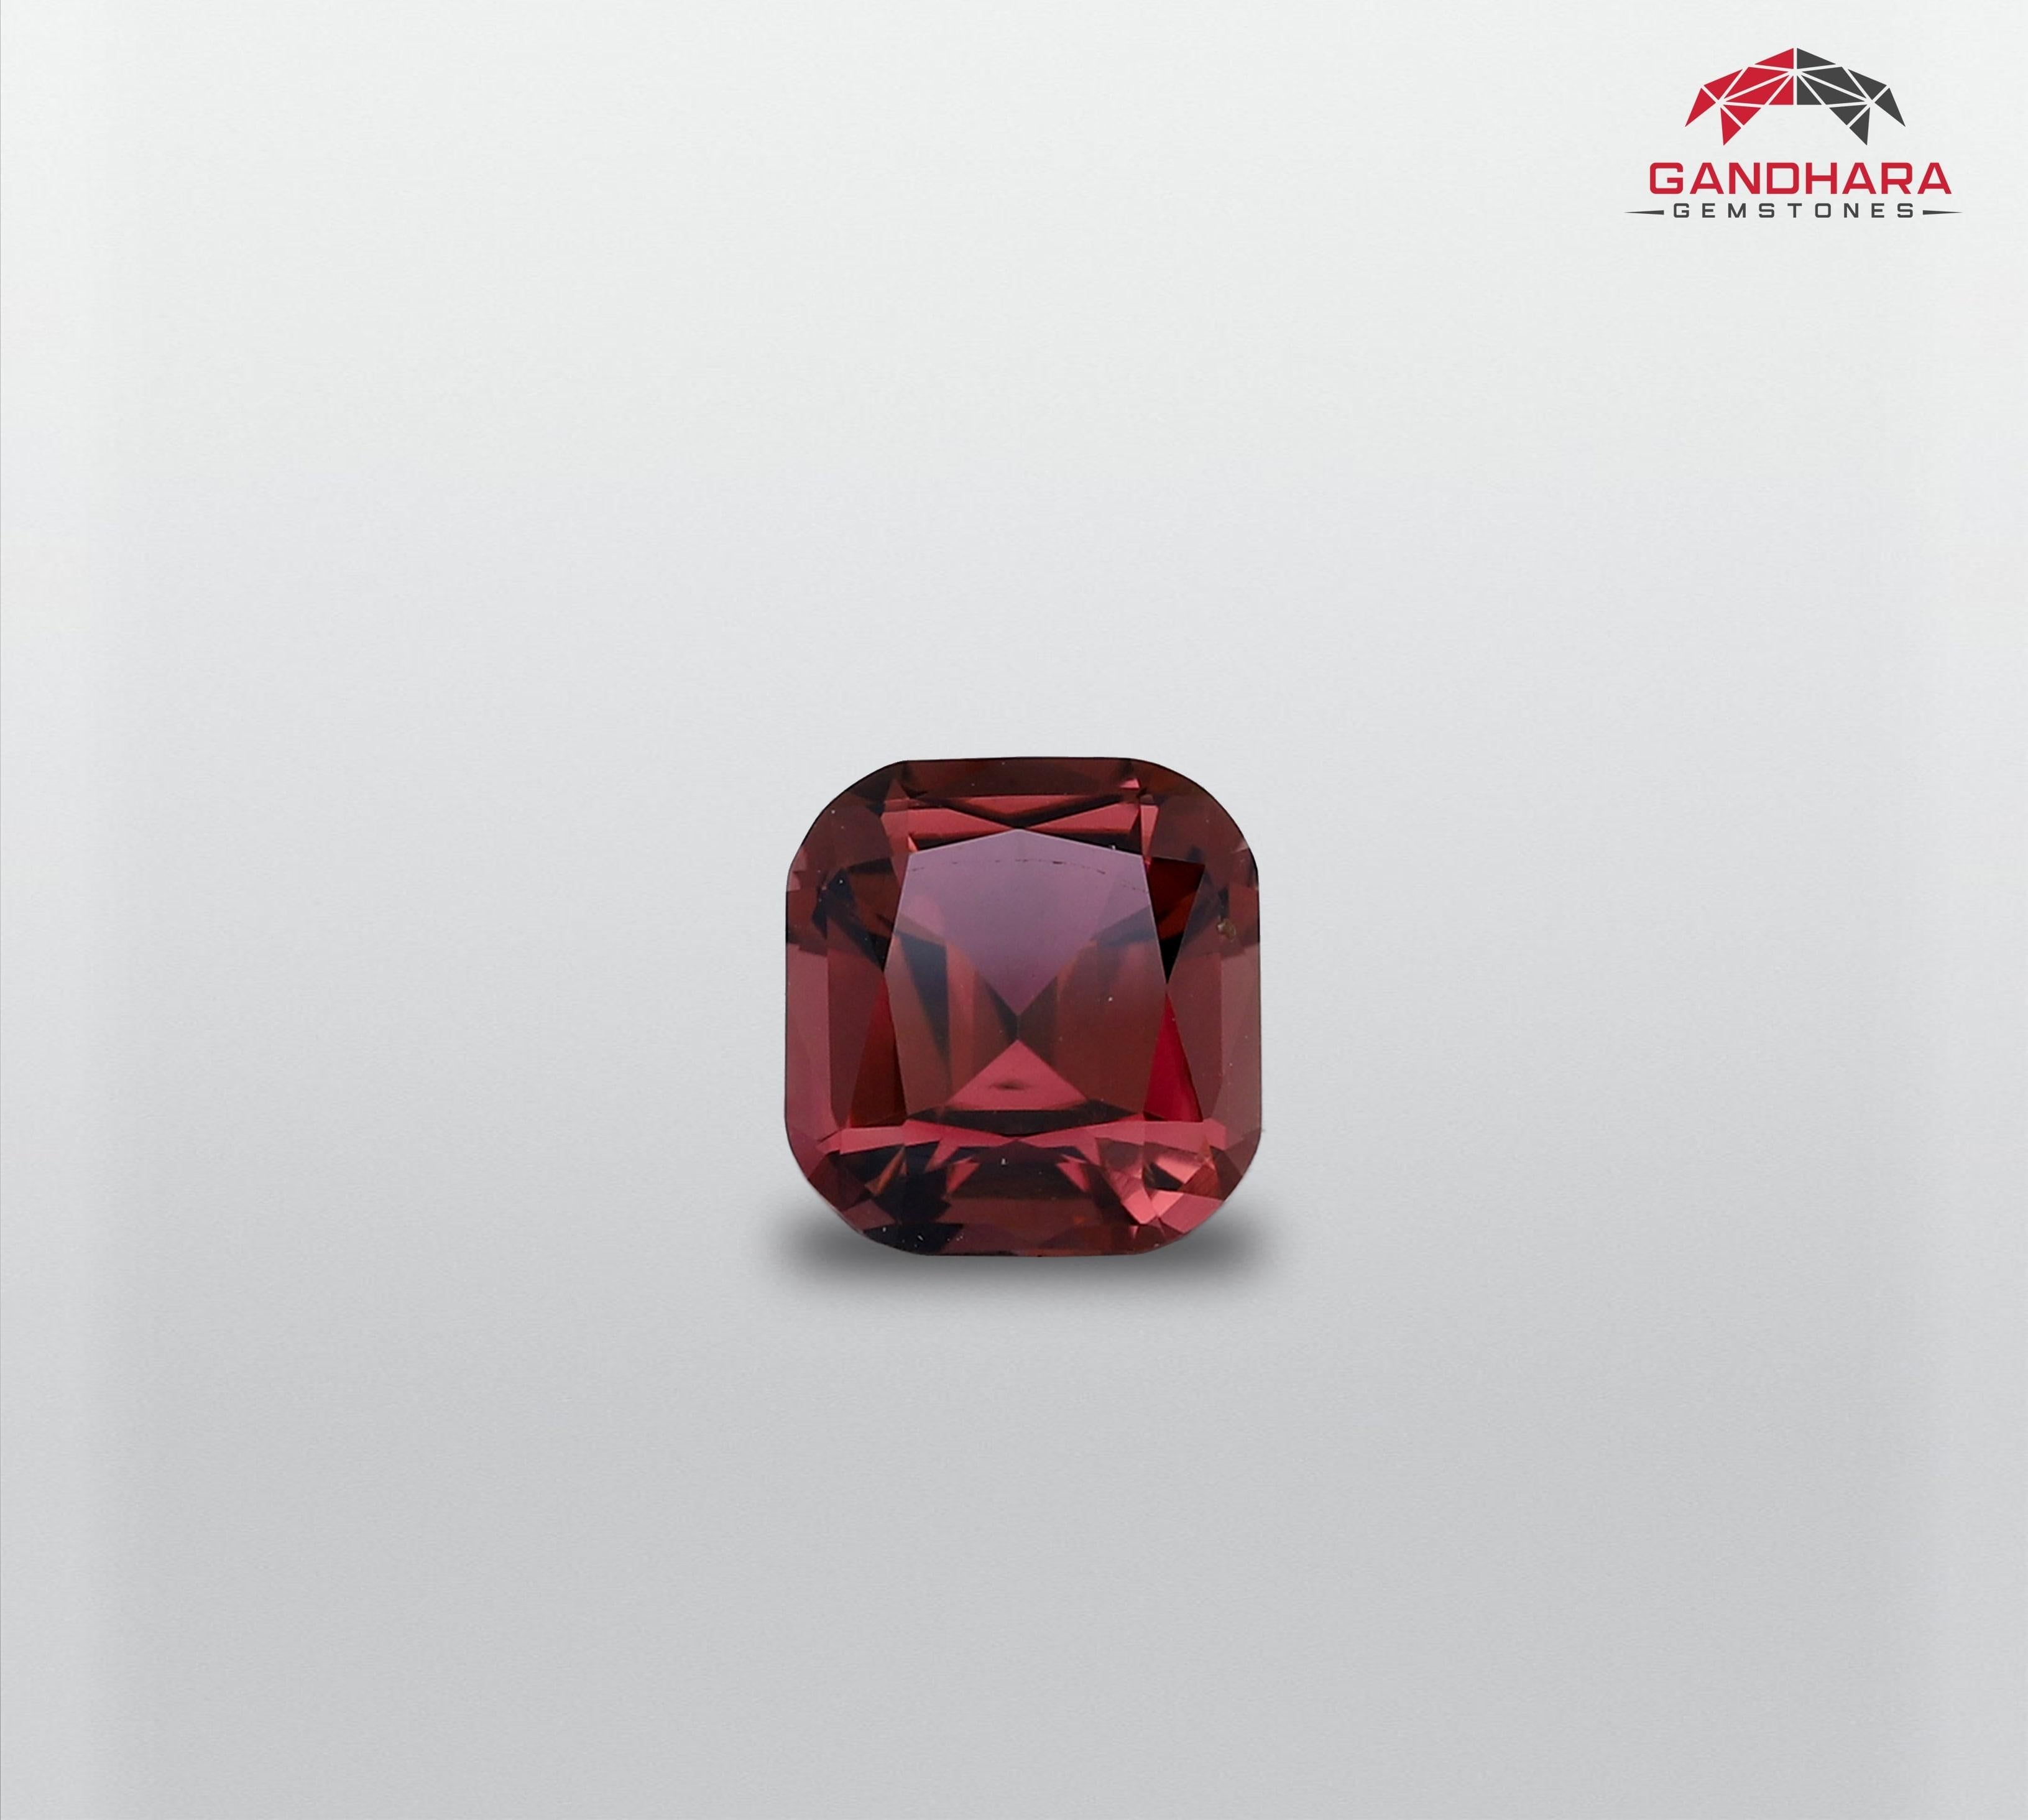 Tourmaline is an extremely popular gemstone; the name Tourmaline is derived from Turamali, which is thought to mean 